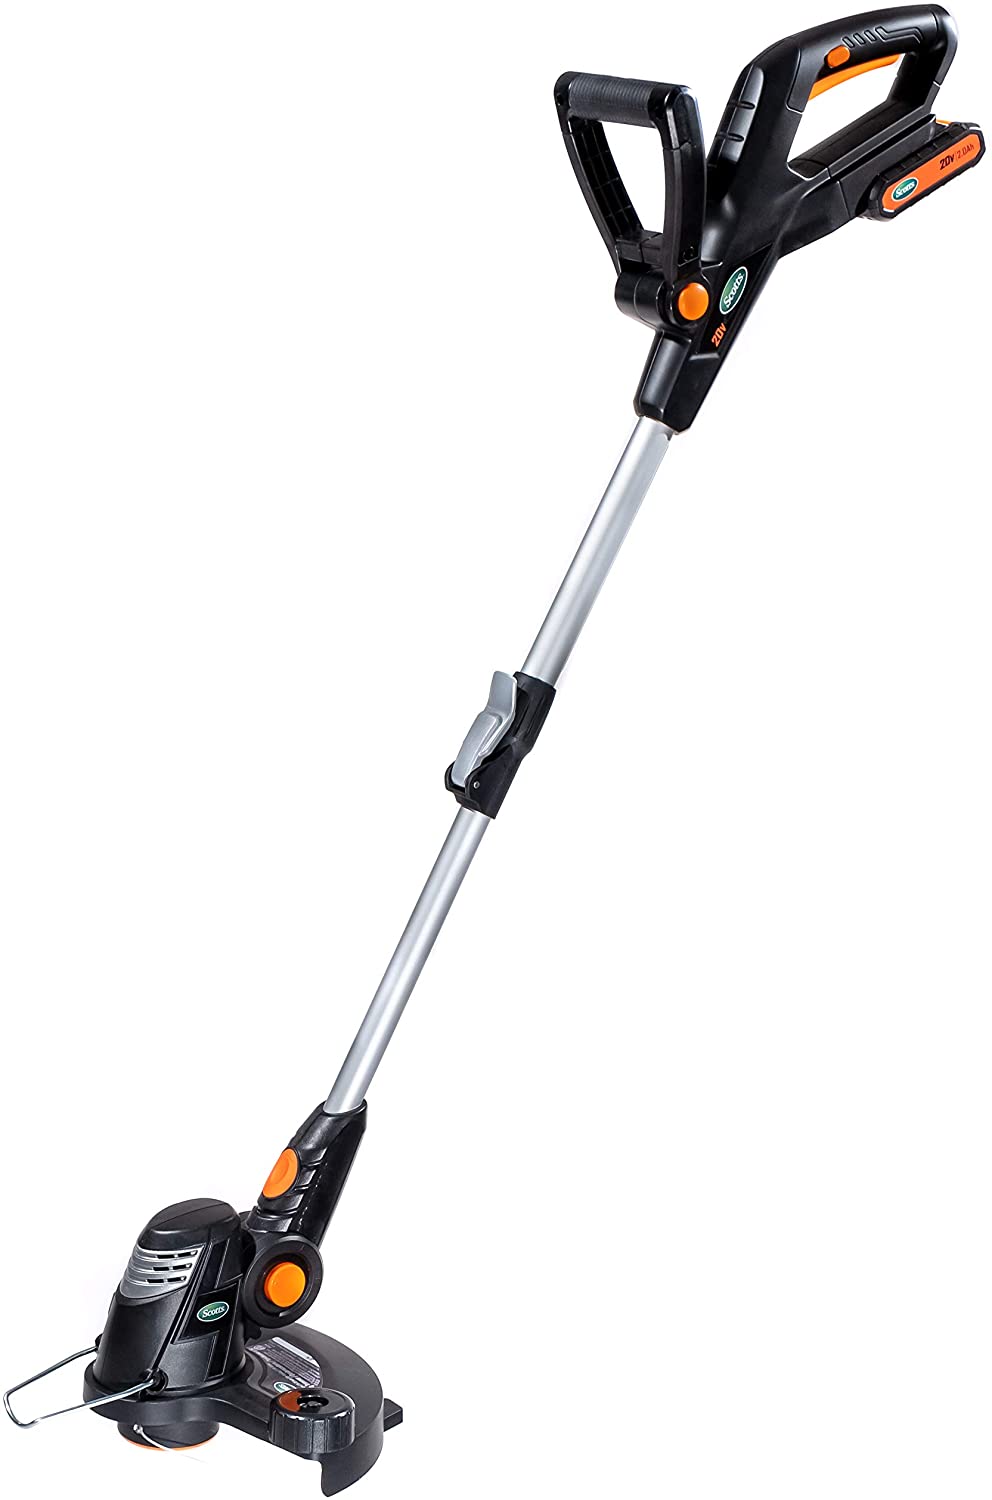 Scotts 12 20-Volt String Lithium Trimmer – American Lawn Mower Co